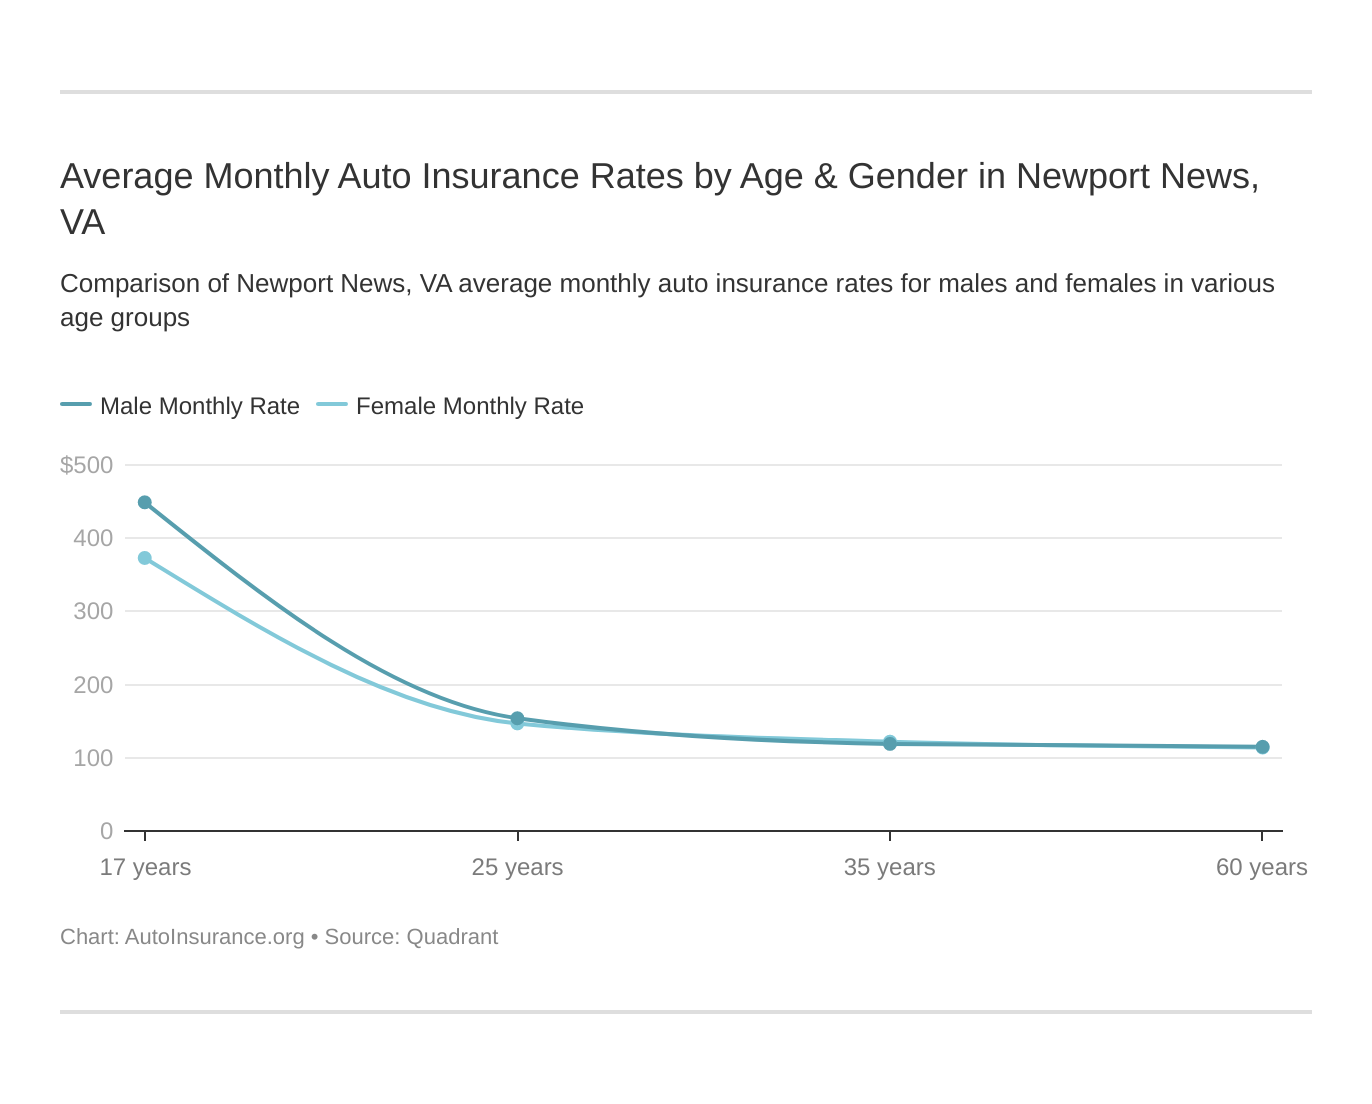 Average Monthly Auto Insurance Rates by Age & Gender in Newport News, VA